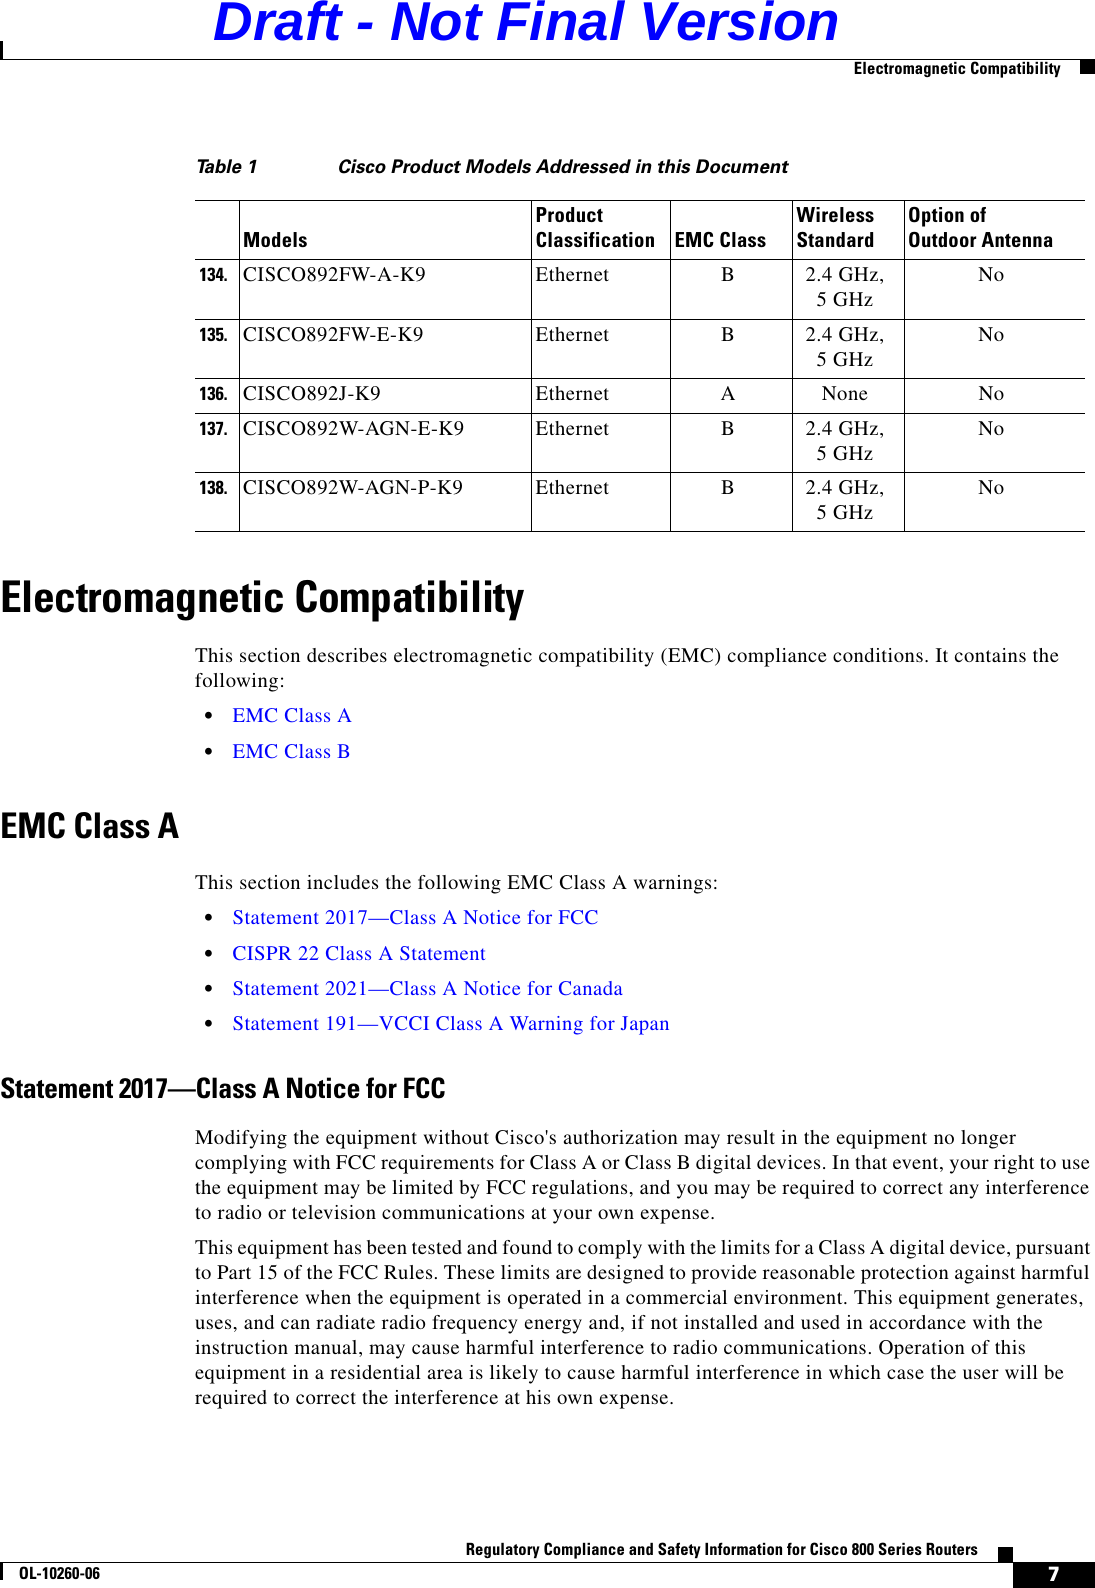 7Regulatory Compliance and Safety Information for Cisco 800 Series RoutersOL-10260-06  Electromagnetic CompatibilityElectromagnetic CompatibilityThis section describes electromagnetic compatibility (EMC) compliance conditions. It contains the following:  •EMC Class A  •EMC Class BEMC Class AThis section includes the following EMC Class A warnings:  •Statement 2017—Class A Notice for FCC  •CISPR 22 Class A Statement  •Statement 2021—Class A Notice for Canada  •Statement 191—VCCI Class A Warning for JapanStatement 2017—Class A Notice for FCCModifying the equipment without Cisco&apos;s authorization may result in the equipment no longer complying with FCC requirements for Class A or Class B digital devices. In that event, your right to use the equipment may be limited by FCC regulations, and you may be required to correct any interference to radio or television communications at your own expense.This equipment has been tested and found to comply with the limits for a Class A digital device, pursuant to Part 15 of the FCC Rules. These limits are designed to provide reasonable protection against harmful interference when the equipment is operated in a commercial environment. This equipment generates, uses, and can radiate radio frequency energy and, if not installed and used in accordance with the instruction manual, may cause harmful interference to radio communications. Operation of this equipment in a residential area is likely to cause harmful interference in which case the user will be required to correct the interference at his own expense.134.CISCO892FW-A-K9 Ethernet B2.4 GHz, 5 GHz No135.CISCO892FW-E-K9 Ethernet B2.4 GHz, 5 GHz No136.CISCO892J-K9 Ethernet ANone No137.CISCO892W-AGN-E-K9 Ethernet B2.4 GHz, 5 GHz No138.CISCO892W-AGN-P-K9 Ethernet B2.4 GHz, 5 GHz NoTable 1 Cisco Product Models Addressed in this DocumentModelsProduct Classification EMC ClassWireless StandardOption of  Outdoor AntennaDraft - Not Final Version